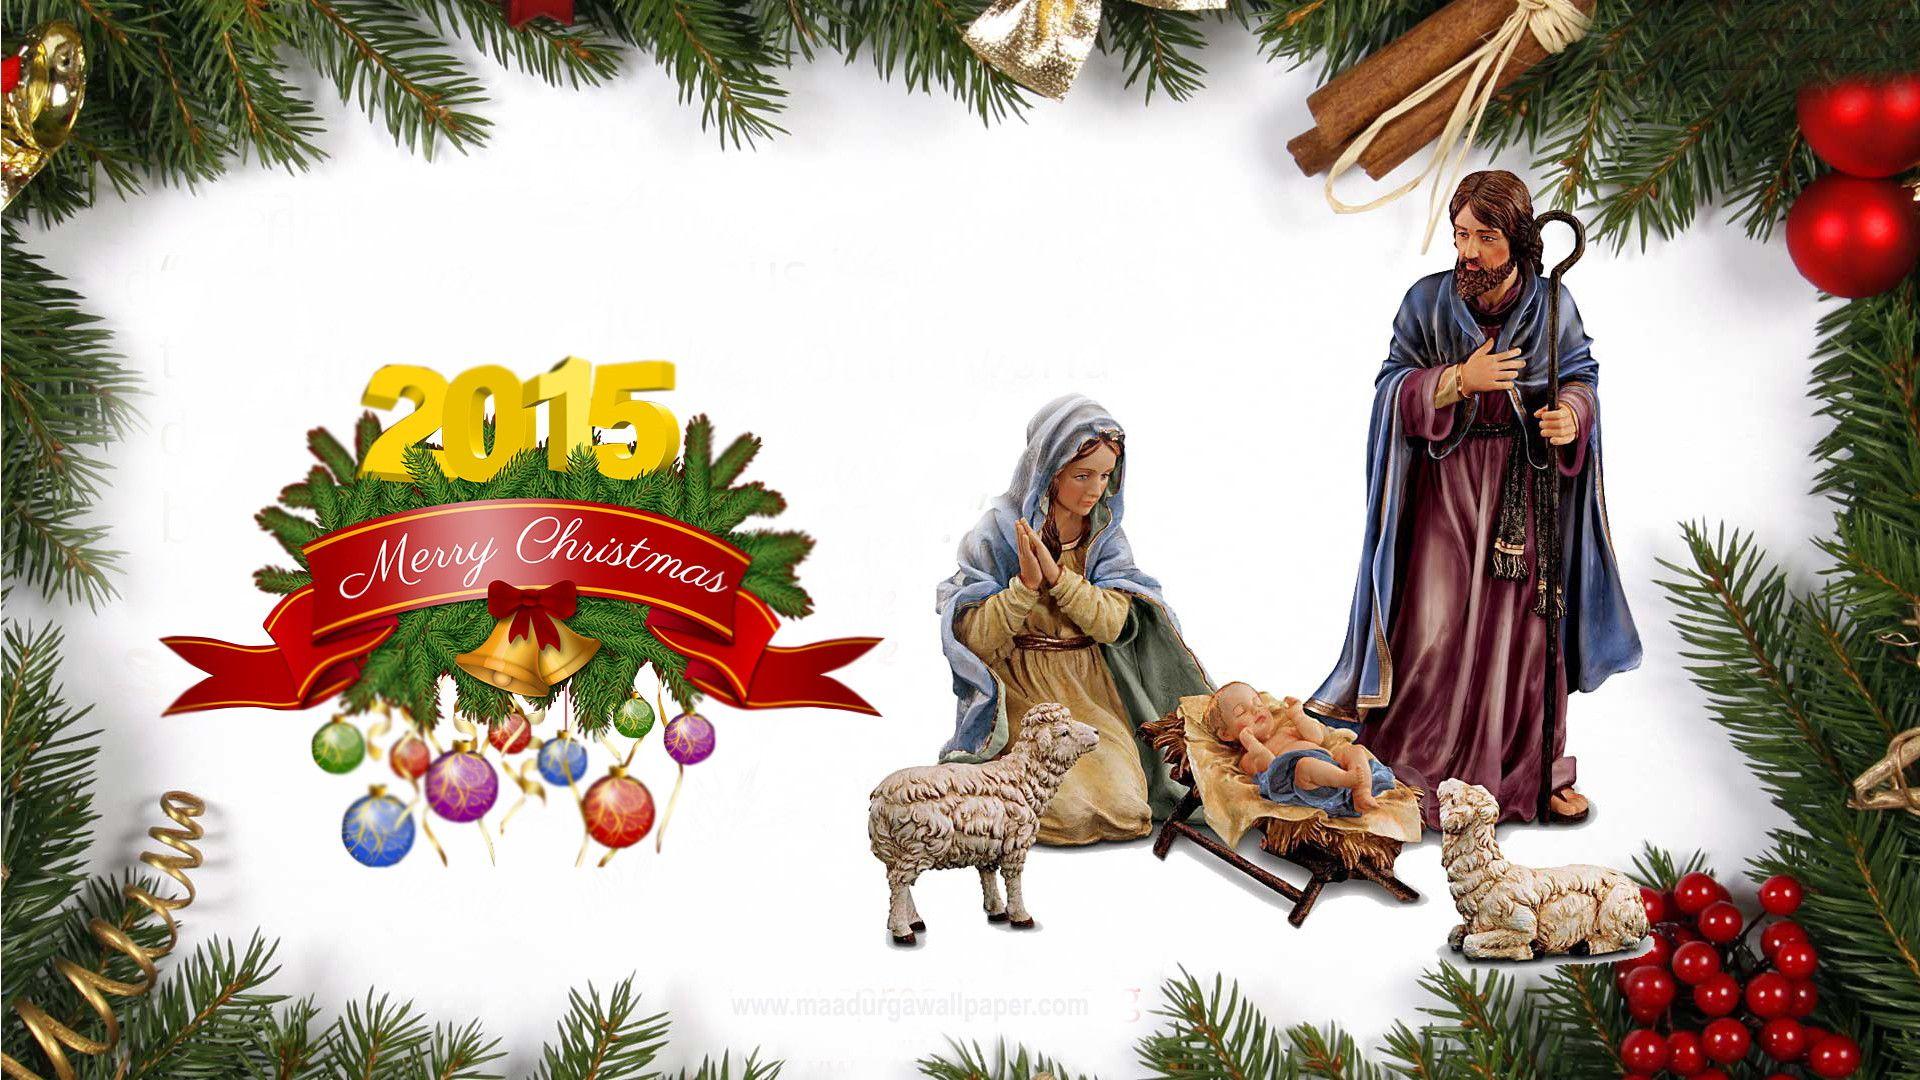 Christmas Picture Baby Jesus download free